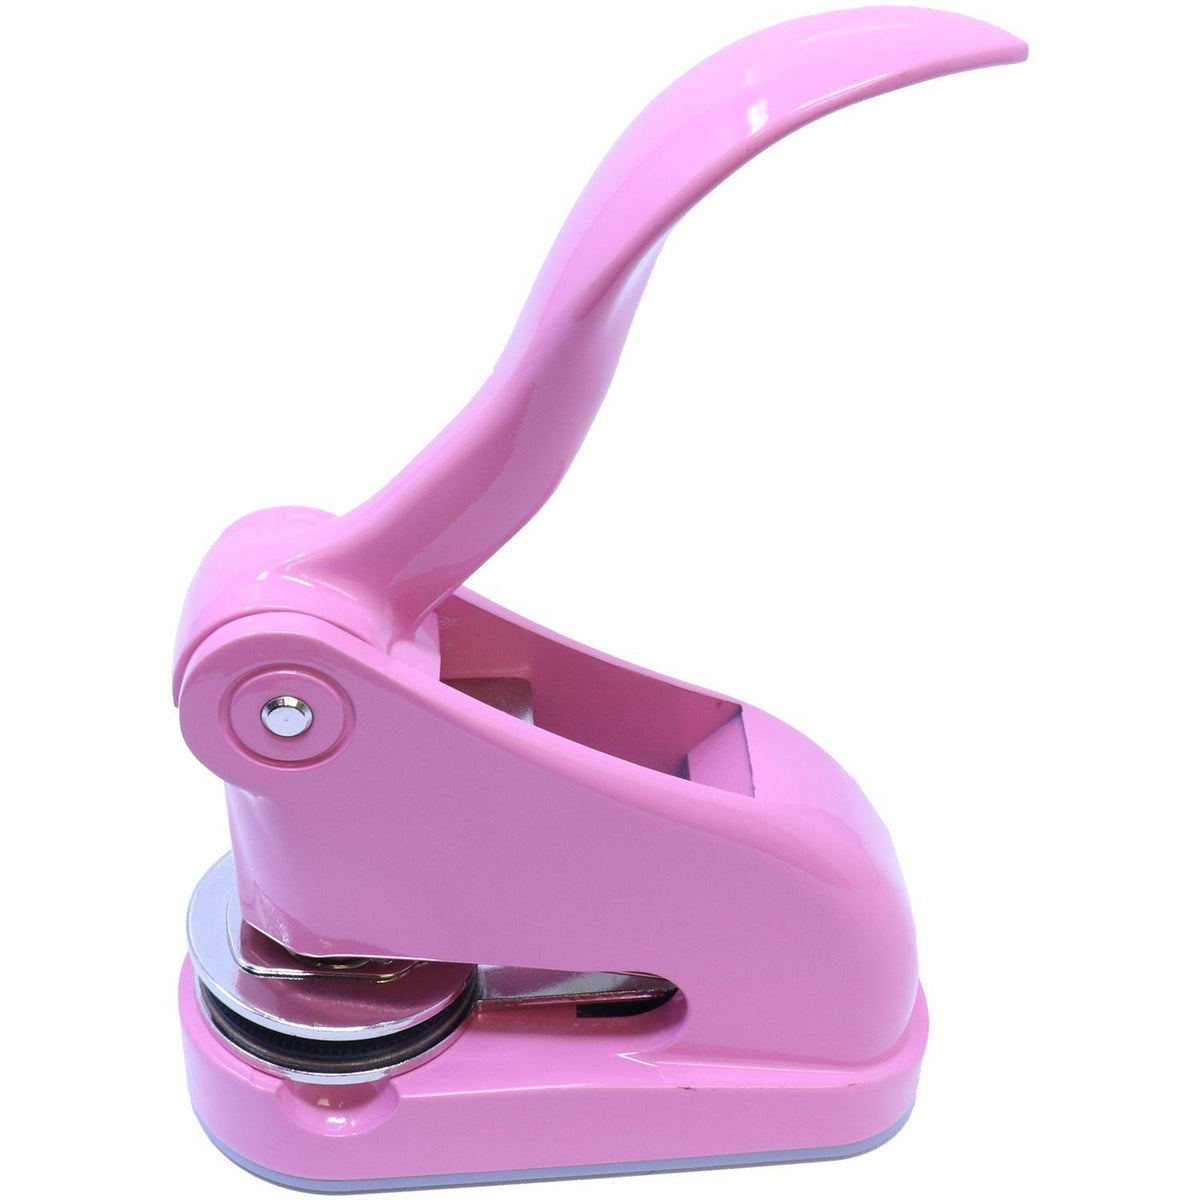 Professional Pink Gift Embosser - Engineer Seal Stamps - Embosser Type_Desk, Embosser Type_Gift, Type of Use_Professional